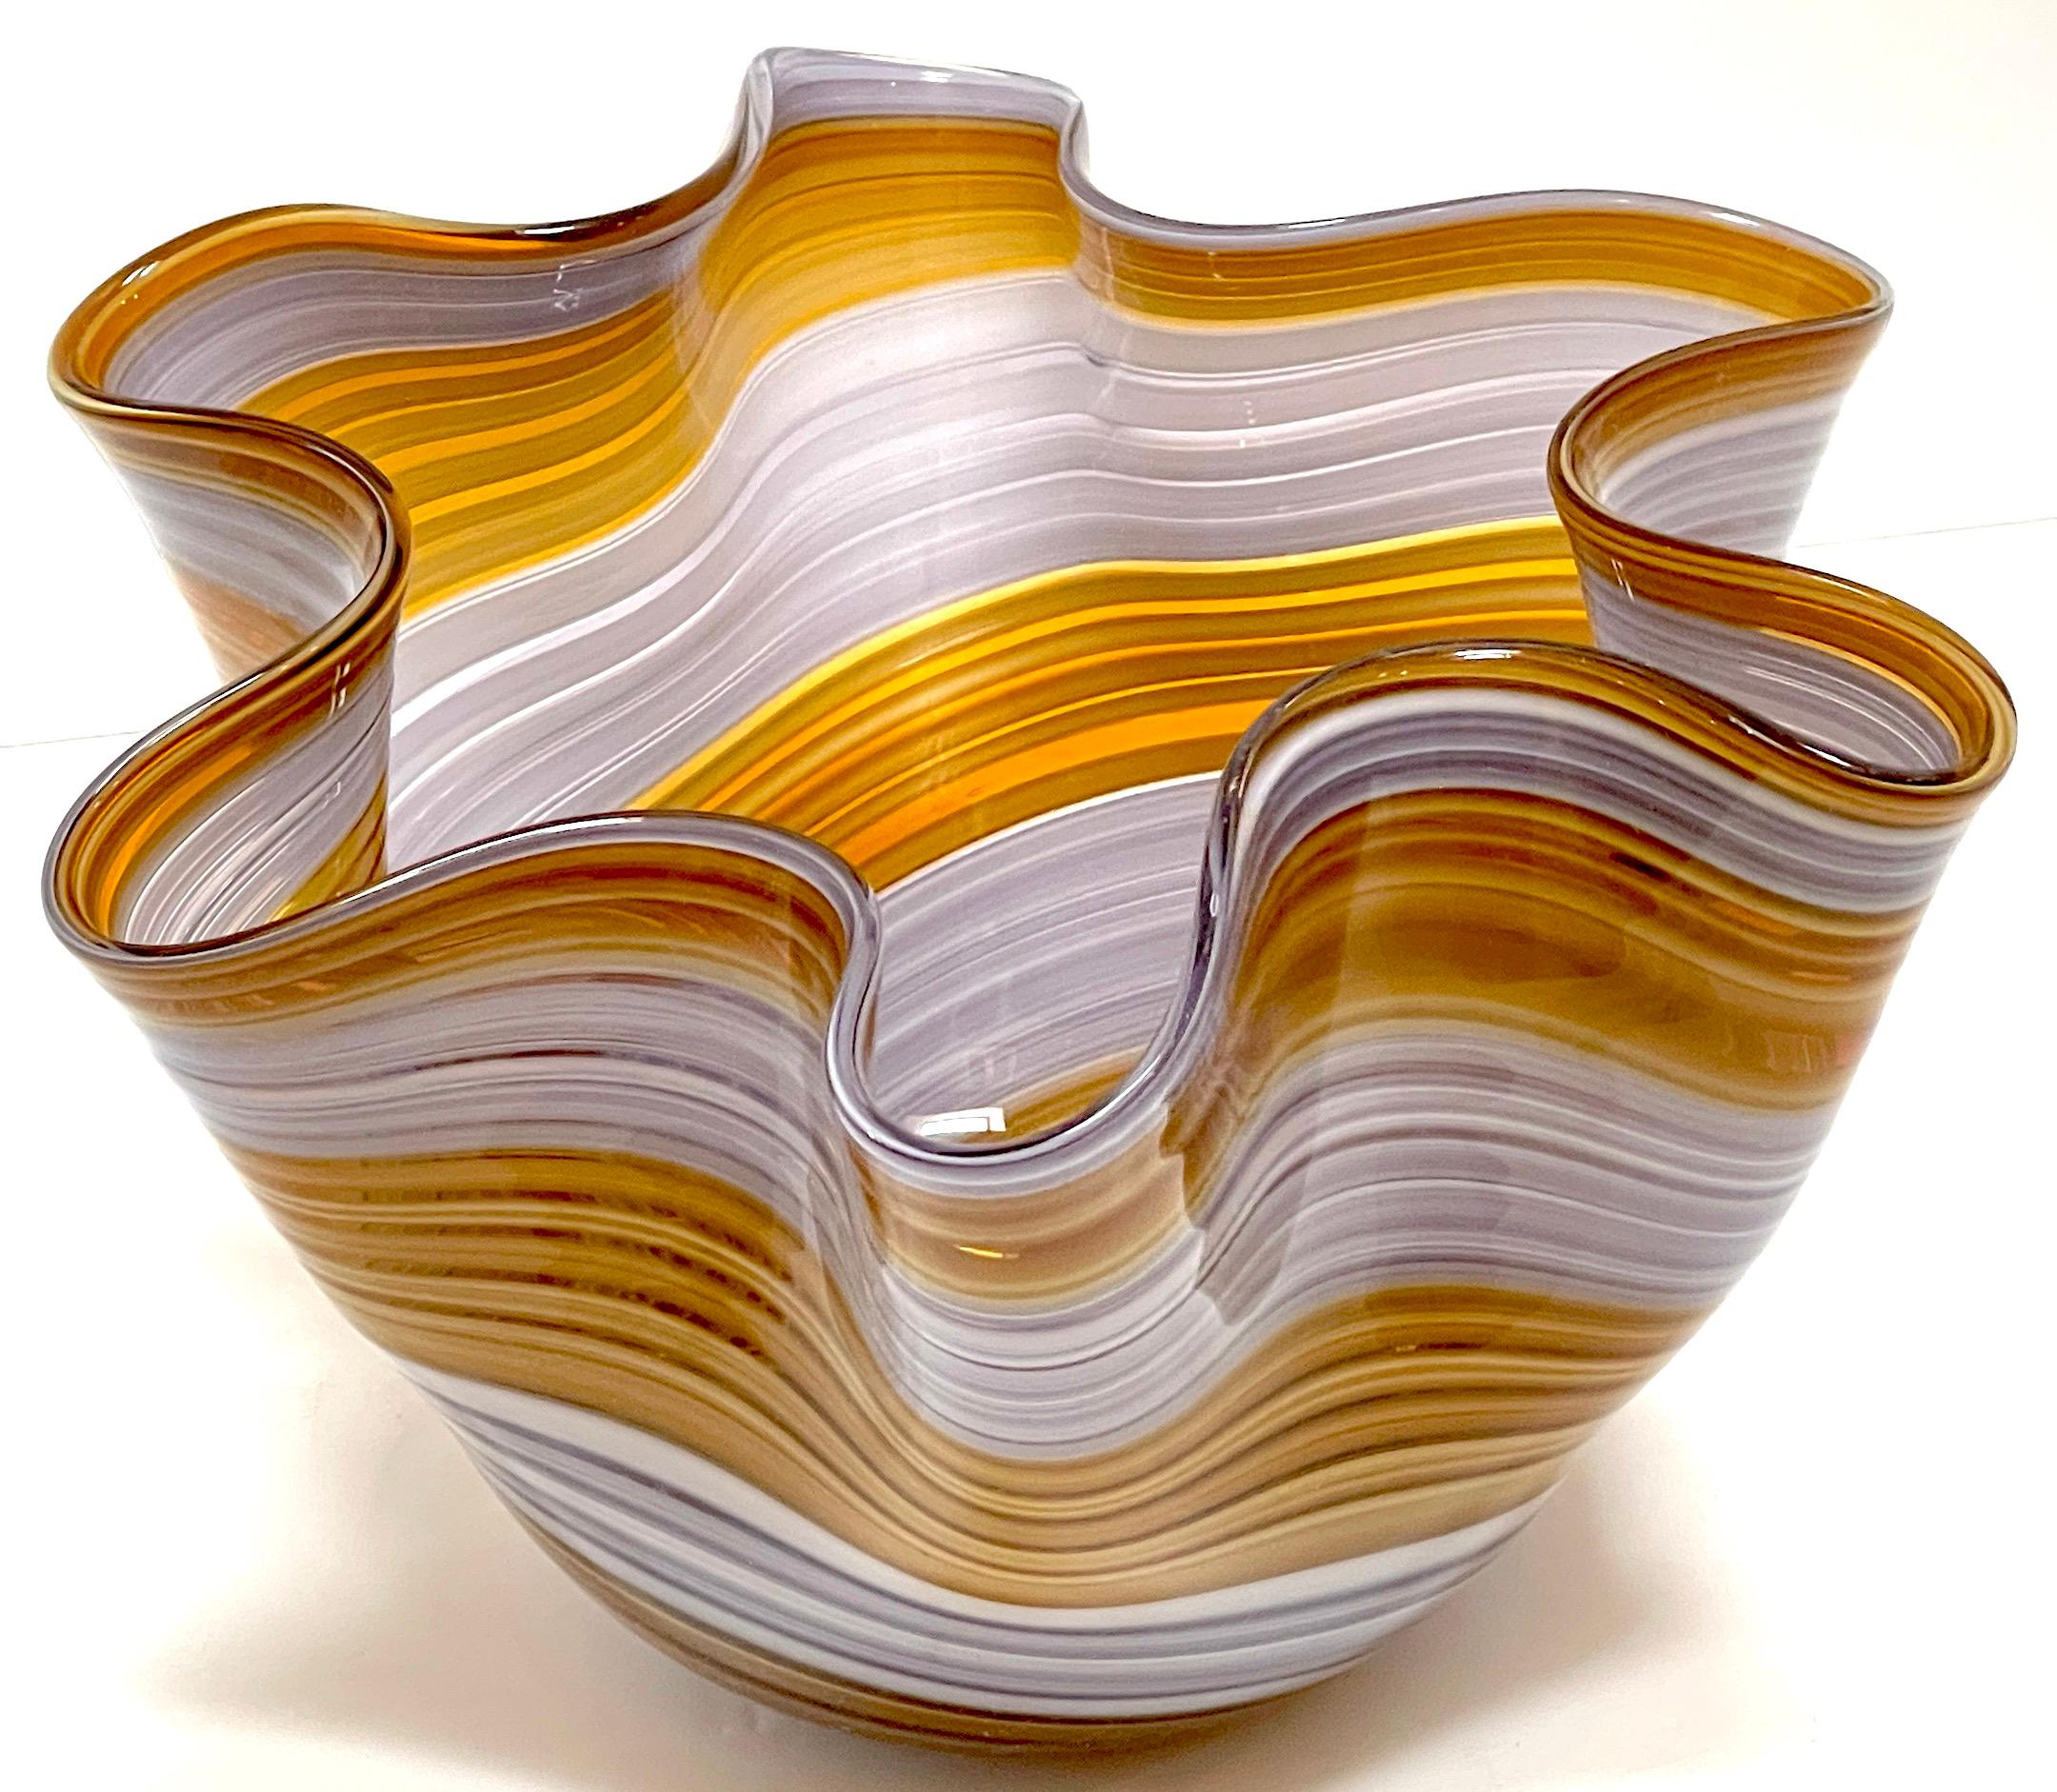 Italian Modern Murano Glass 'Handkerchief' Bowl in Earth Tones

Offered for sale is a stunning piece of Italian craftsmanship, this Italian Modern Murano Glass 'Handkerchief' Bowl in Earth Tones. Expertly handcrafted on the island of Murano, Italy,